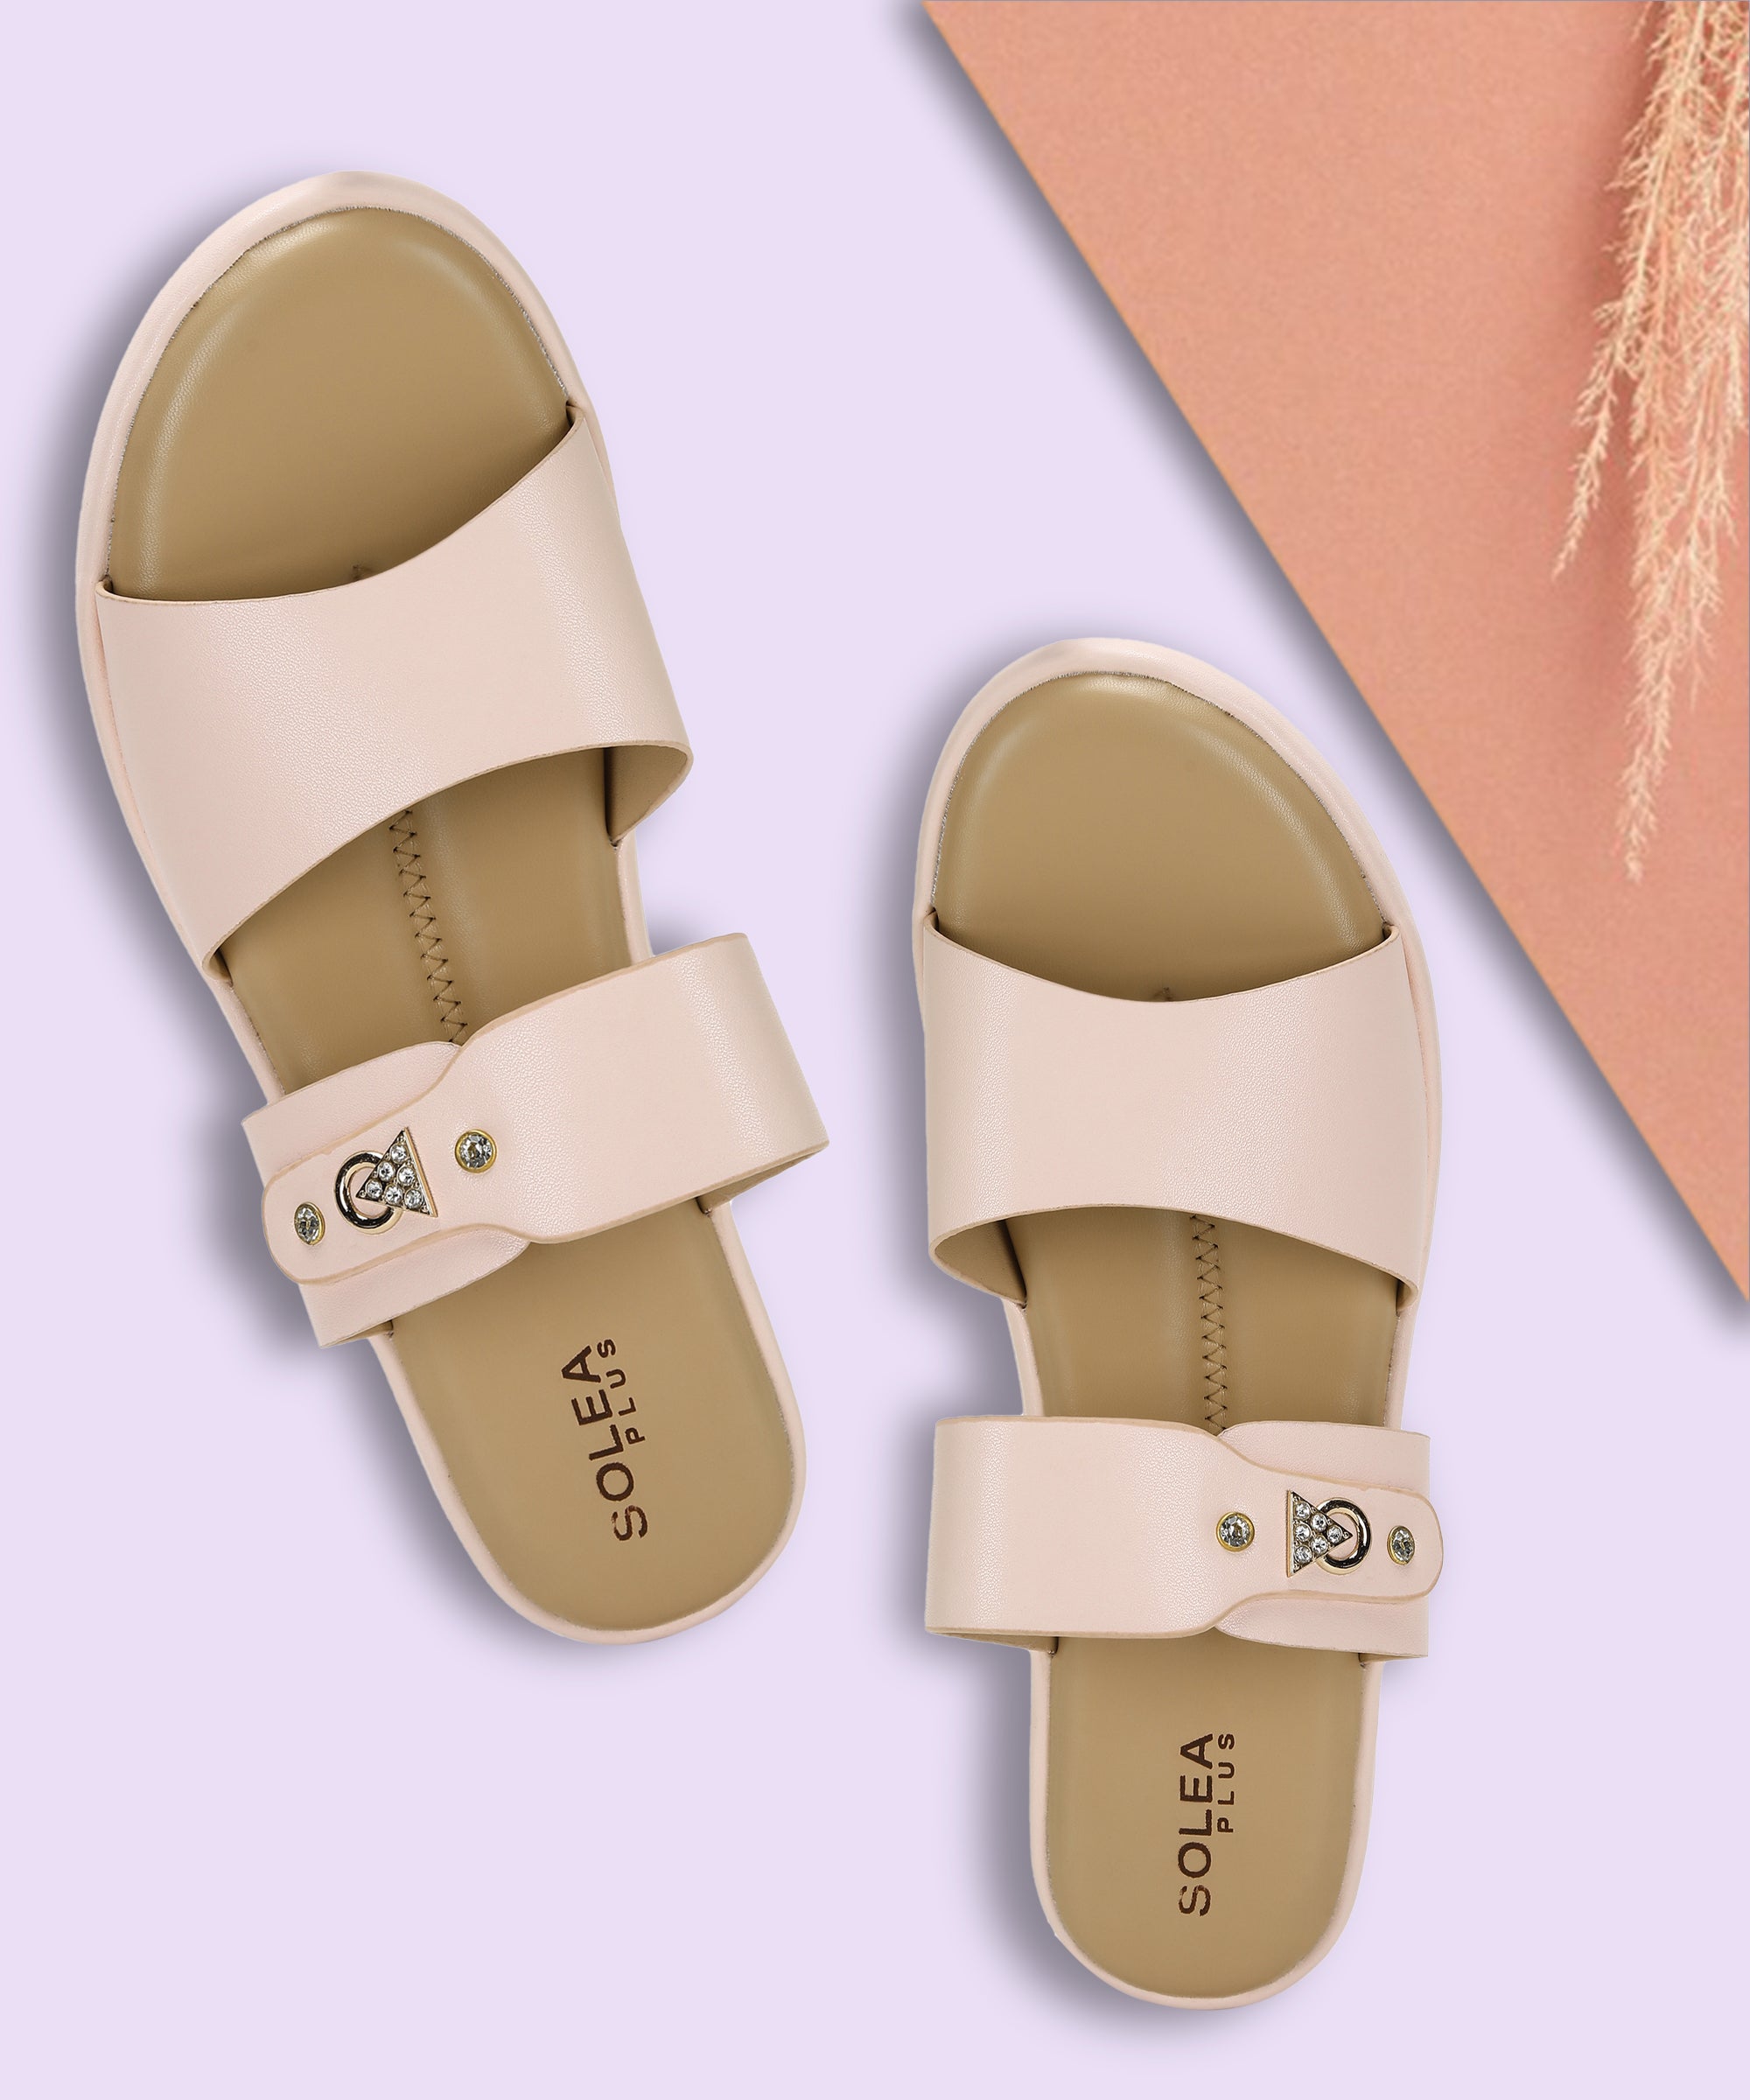 Paragon RK6026L Women Sandals | Casual &amp; Formal Sandals | Stylish, Comfortable &amp; Durable | For Daily &amp; Occasion Wear